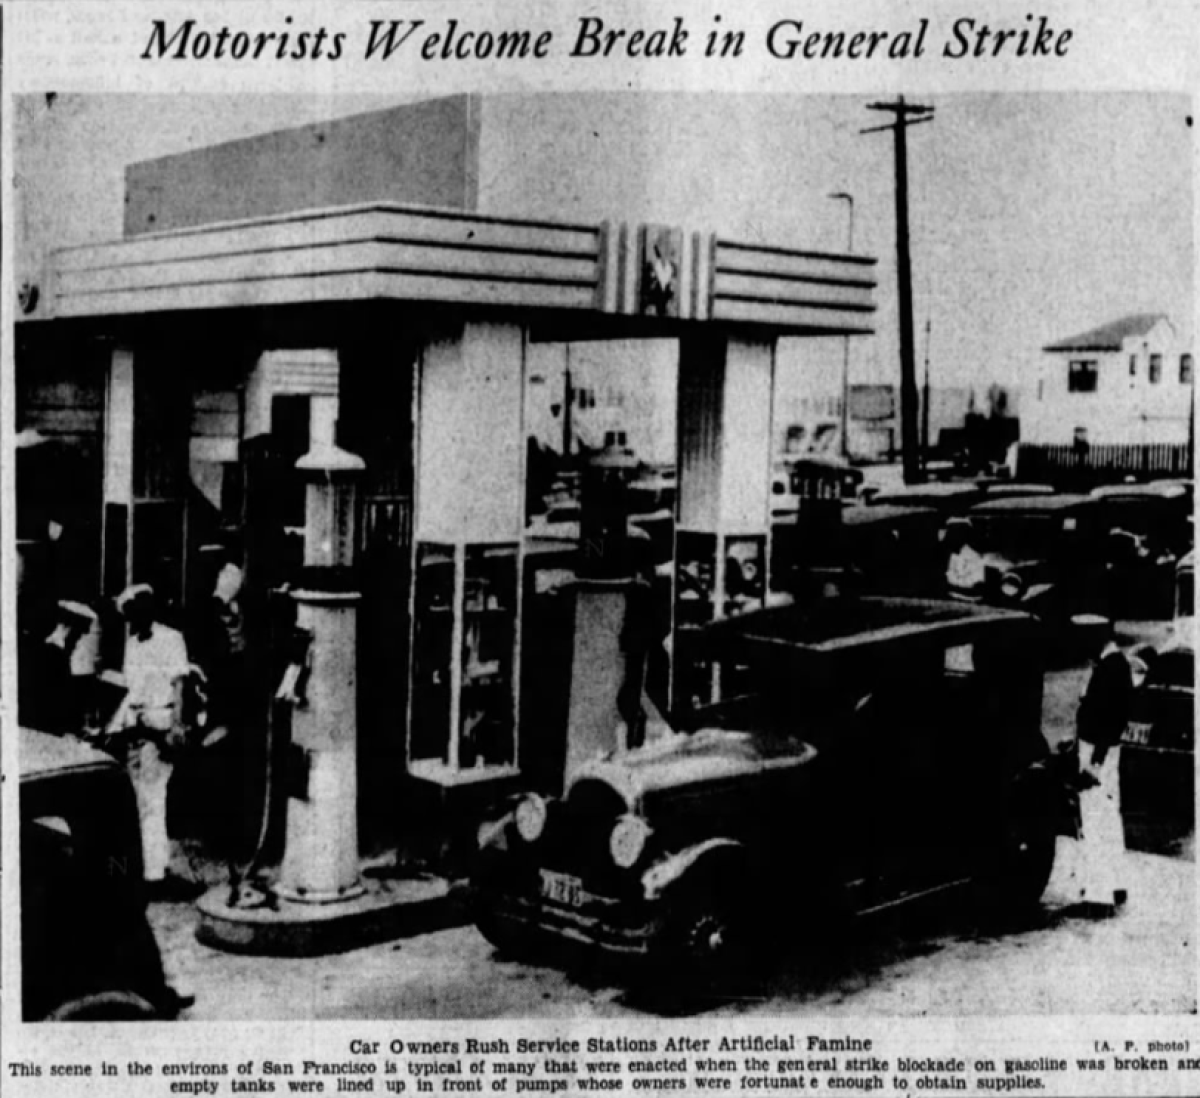 A newspaper clipping shows 1930s-era cars lined up at gas pumps with workers in white pumping gas.